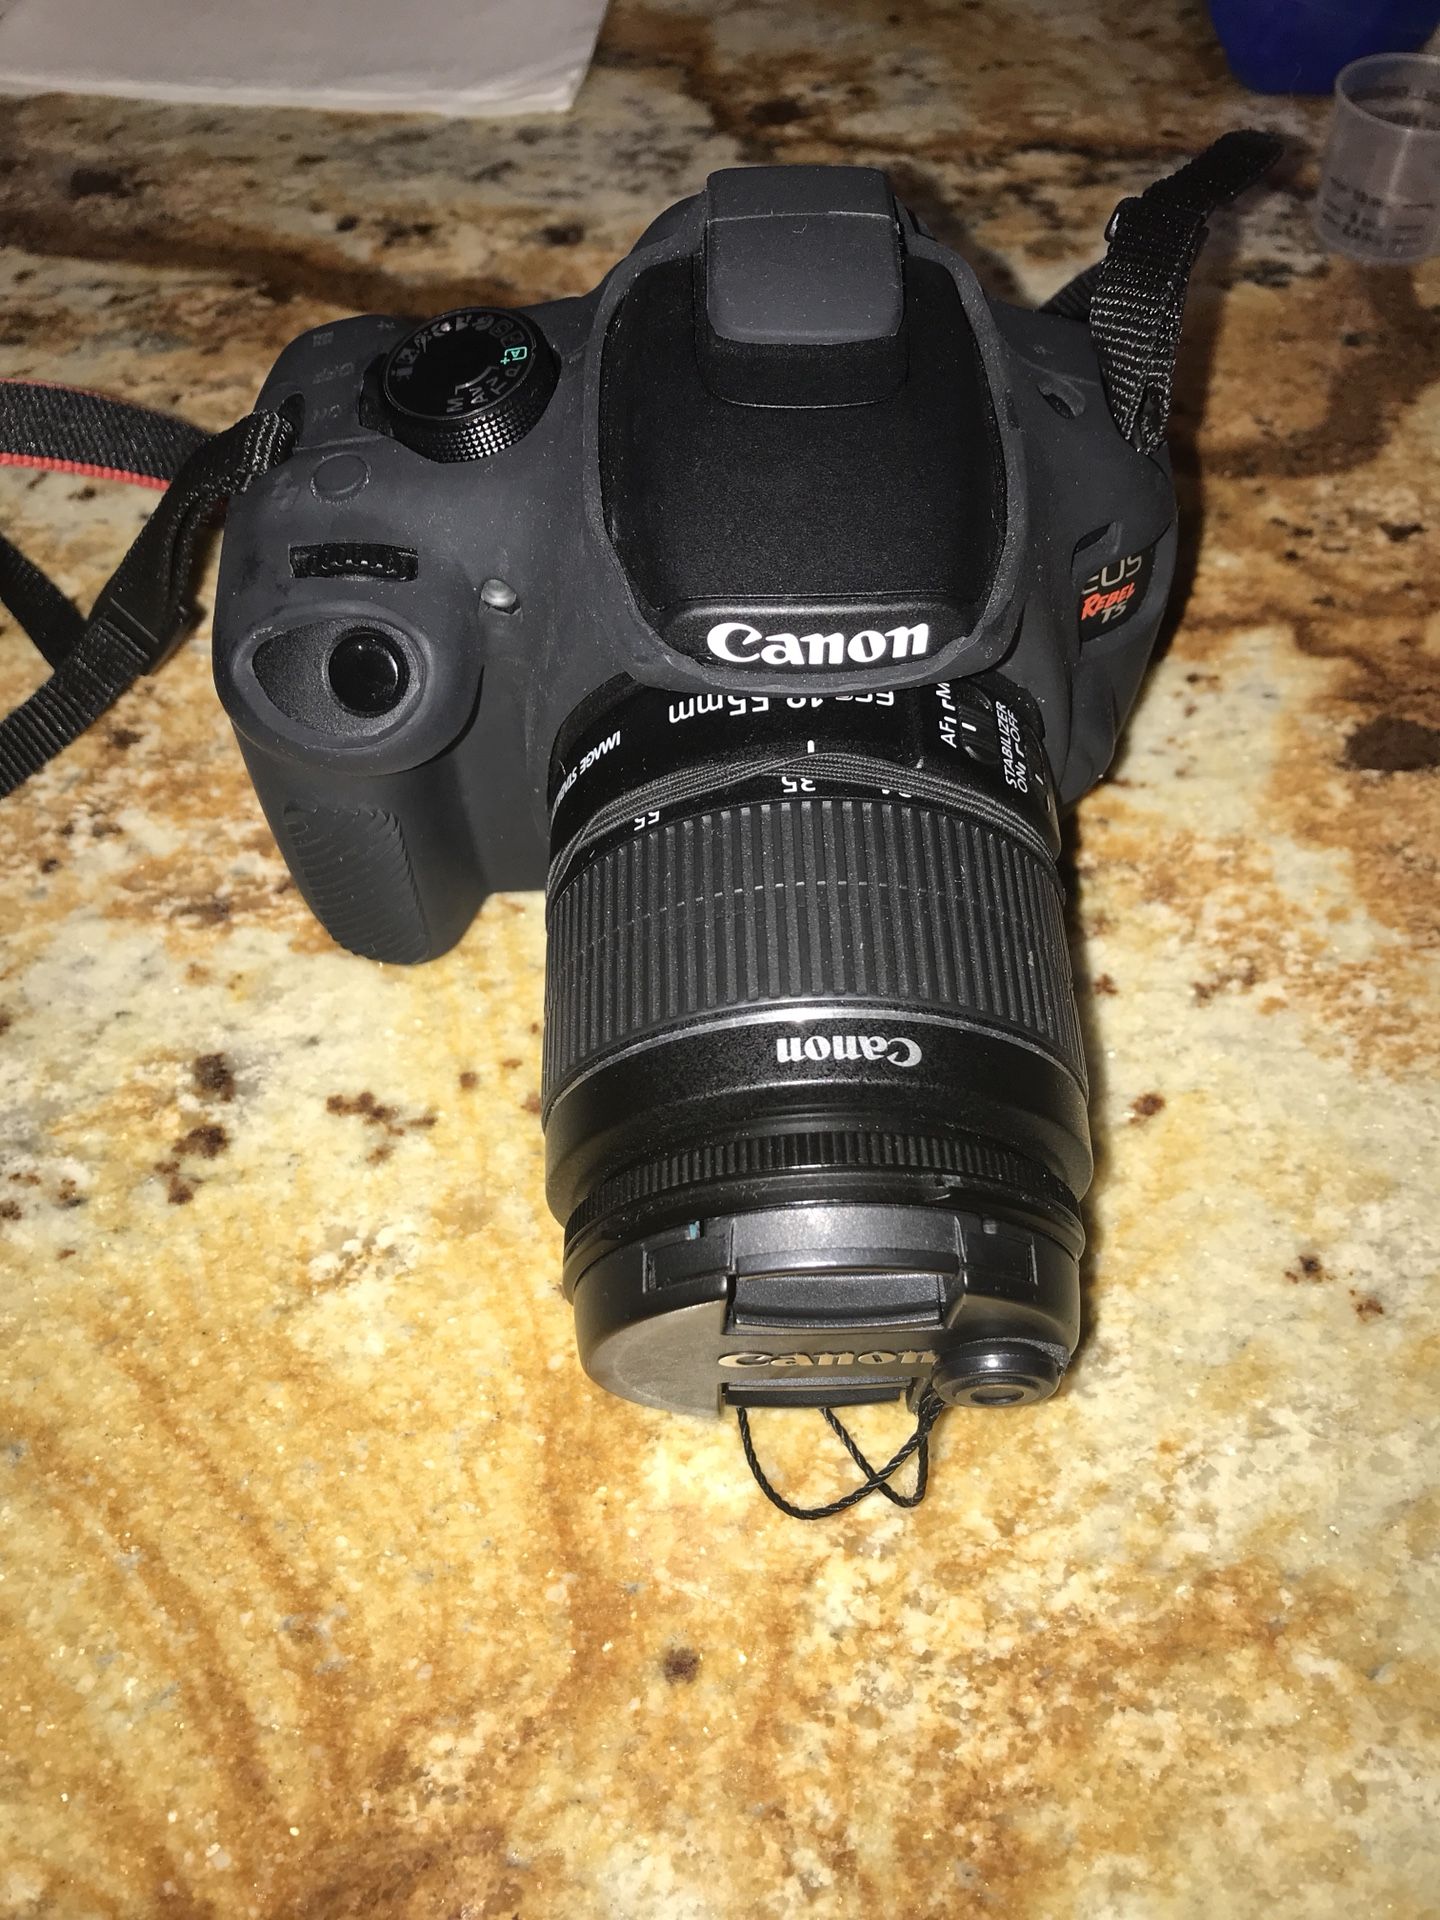 Canon Rebel T5, it comes with 2 lenses for different ranges of photos, 2 batteries and chargers, a case for the camera which is on, a thing to make t